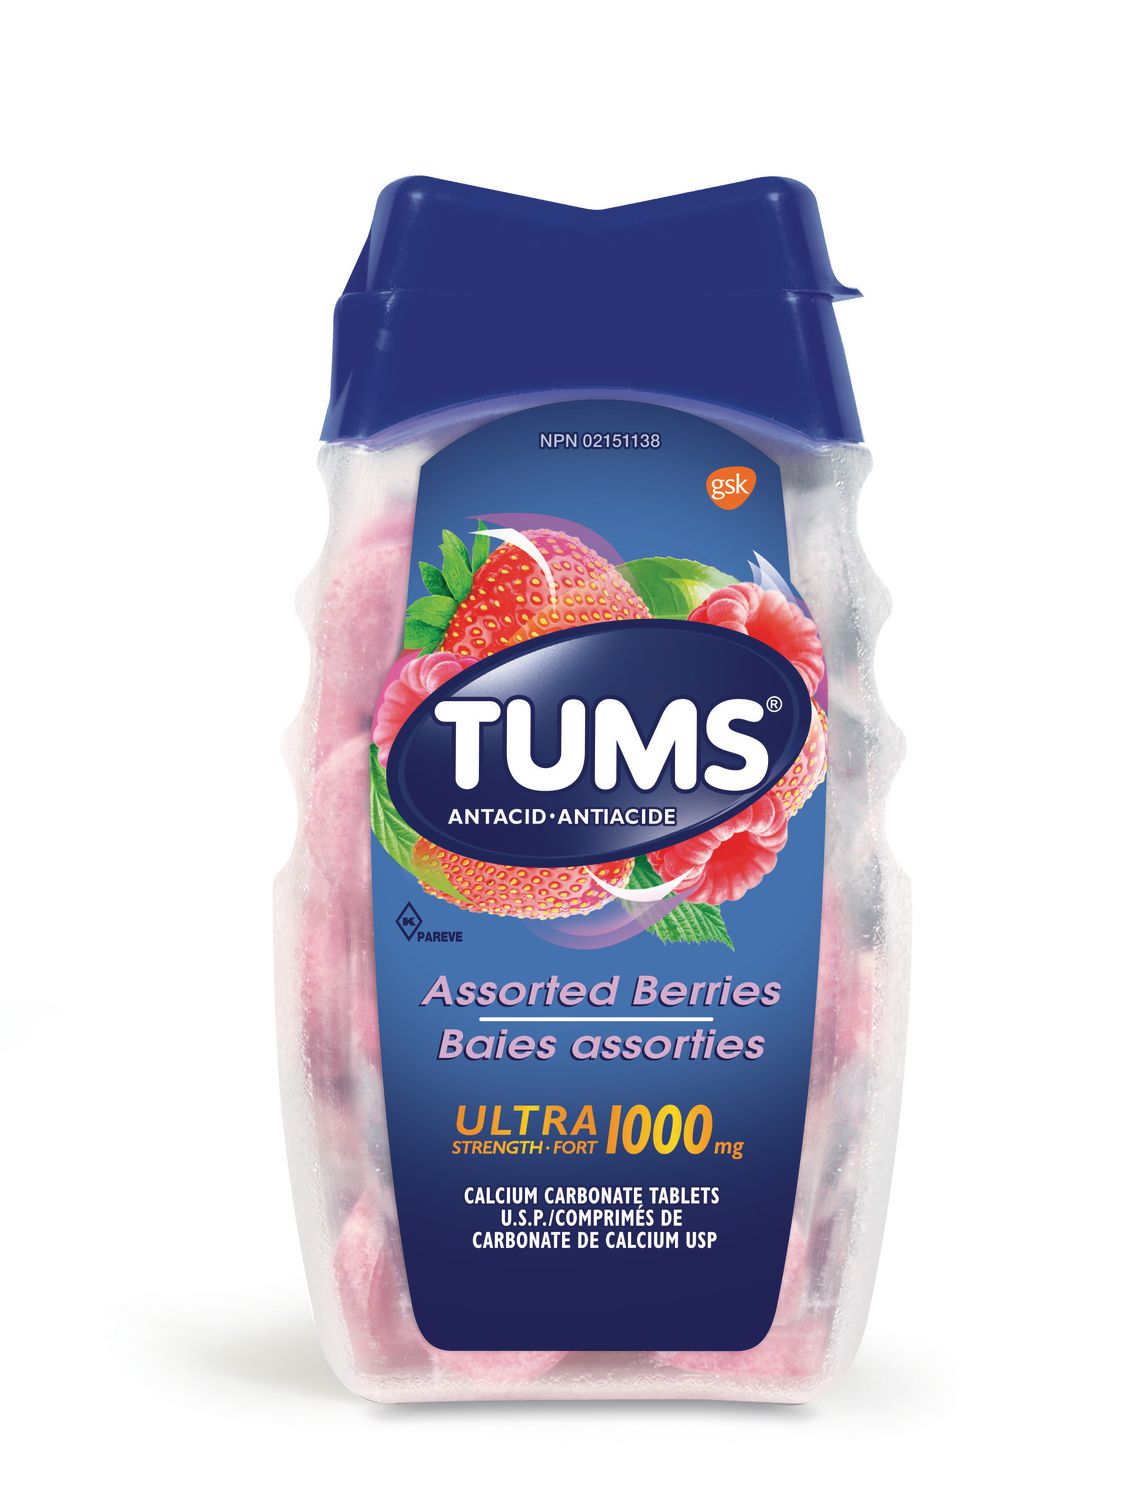 Tums Ultra Strength 1000mg Antacid for Heartburn Relief ...